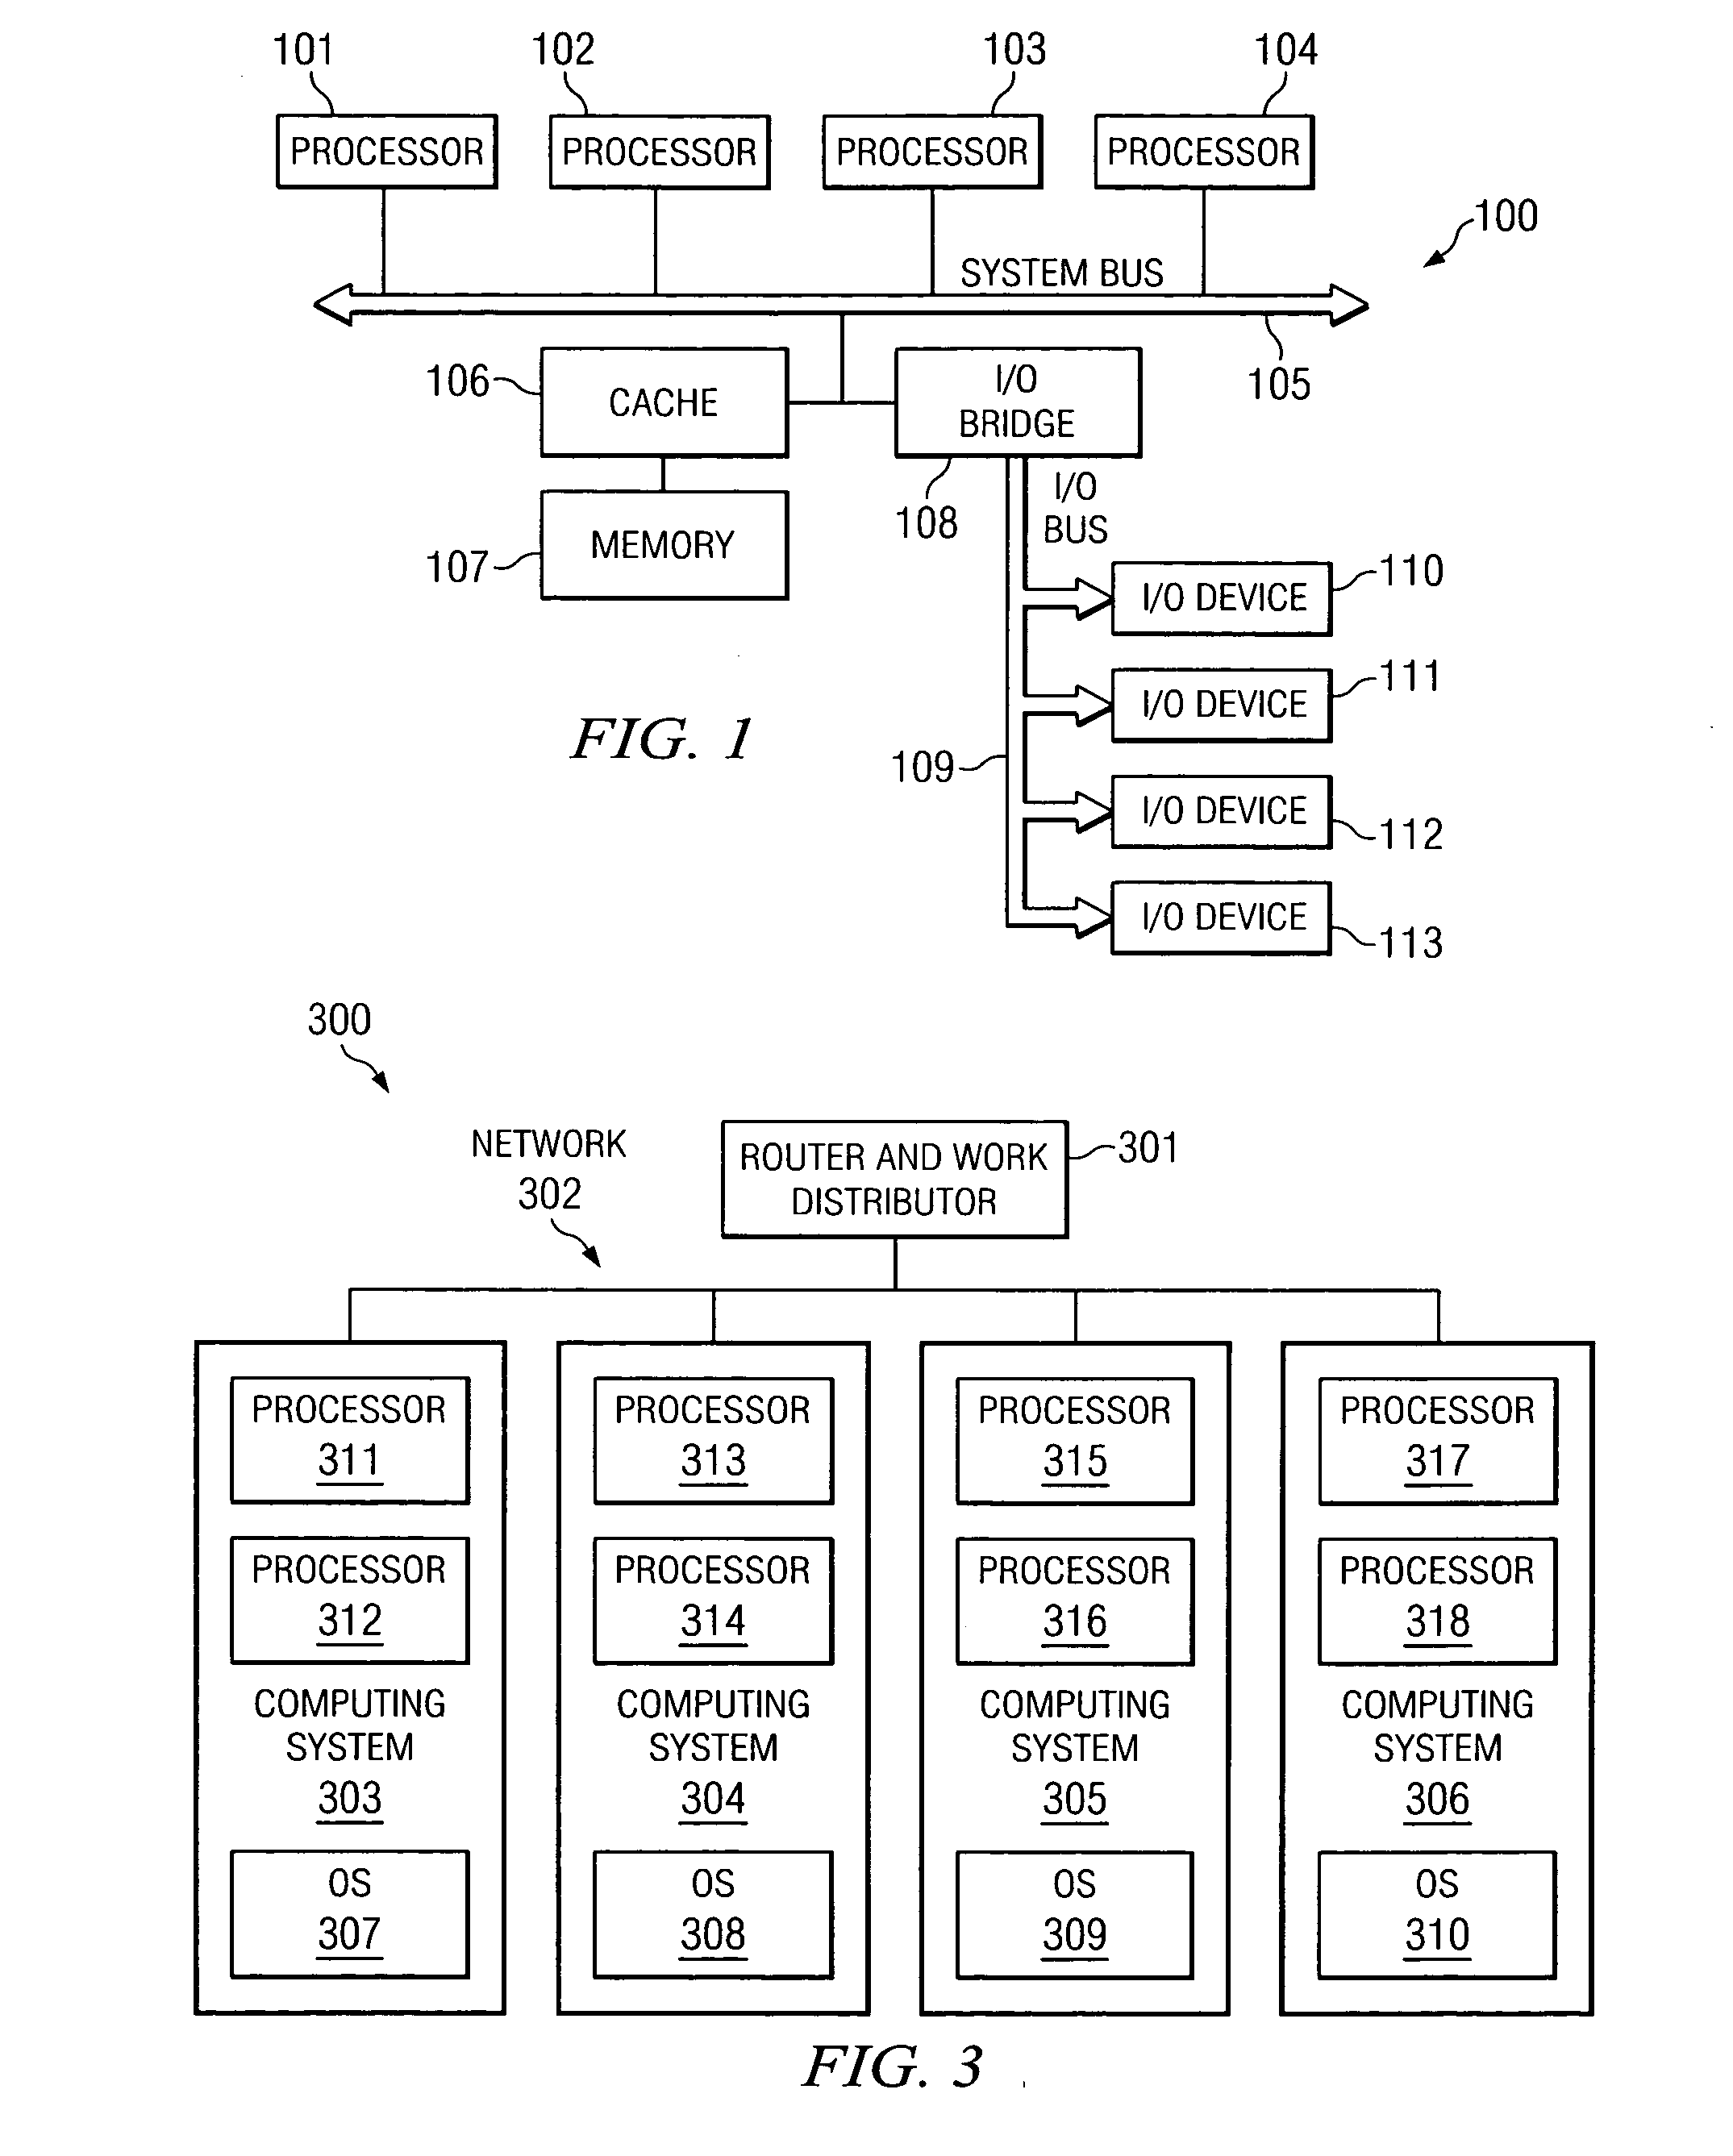 Scheduling processor voltages and frequencies based on performance prediction and power constraints